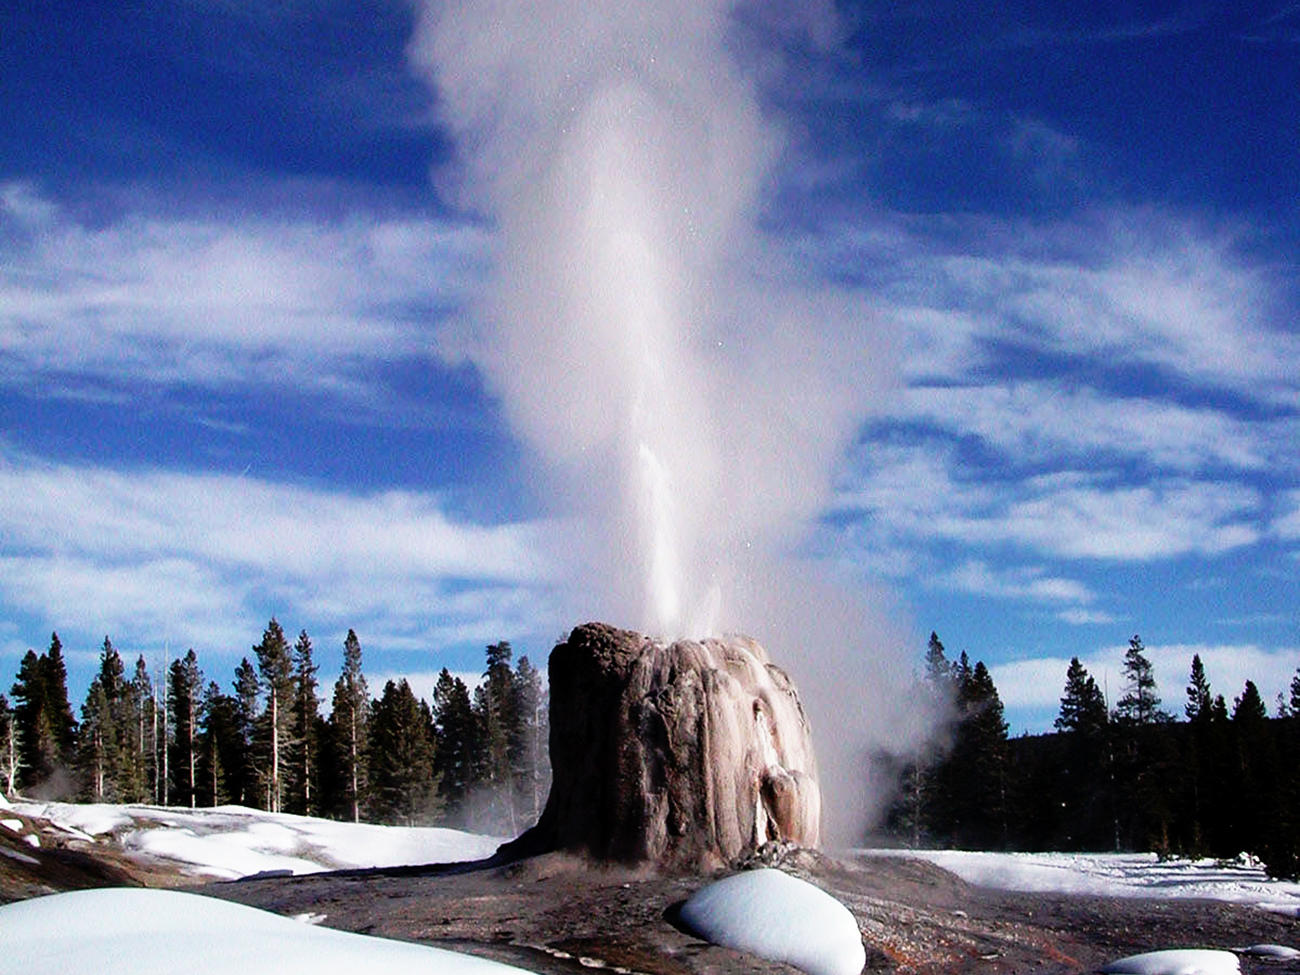 About Yellowstone National Park